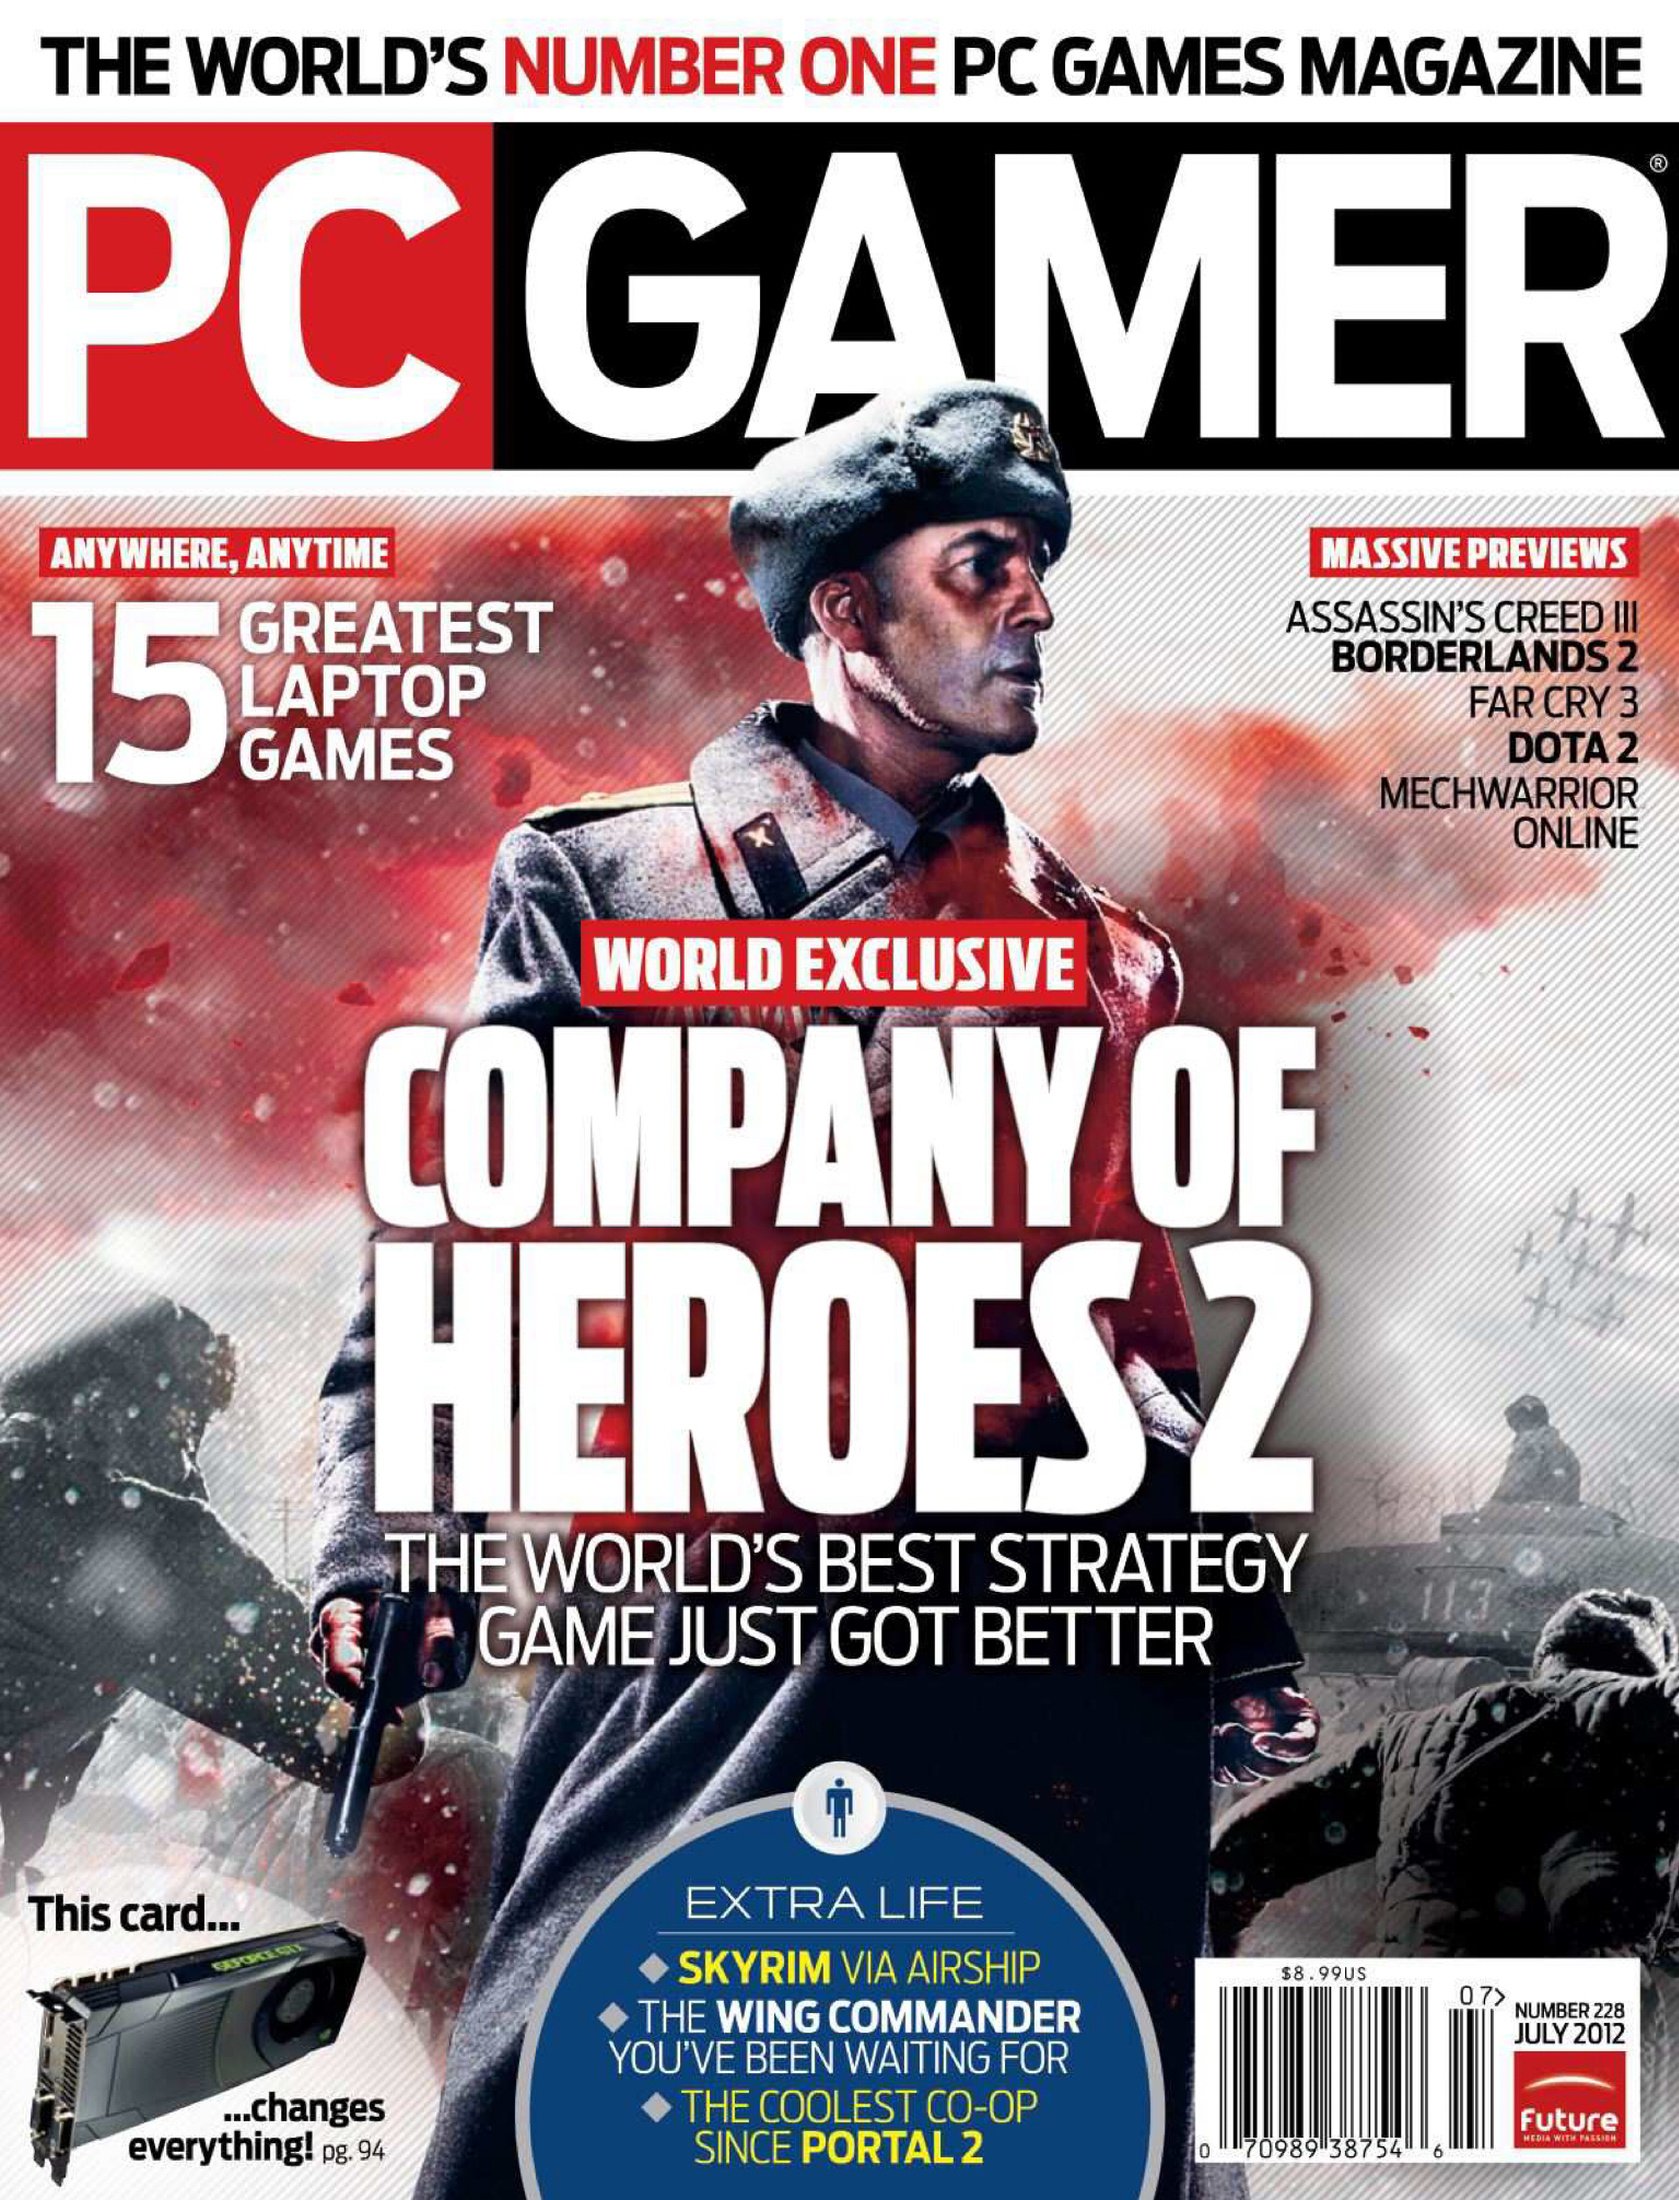 PC Gamer Issue 228 (July 2012)